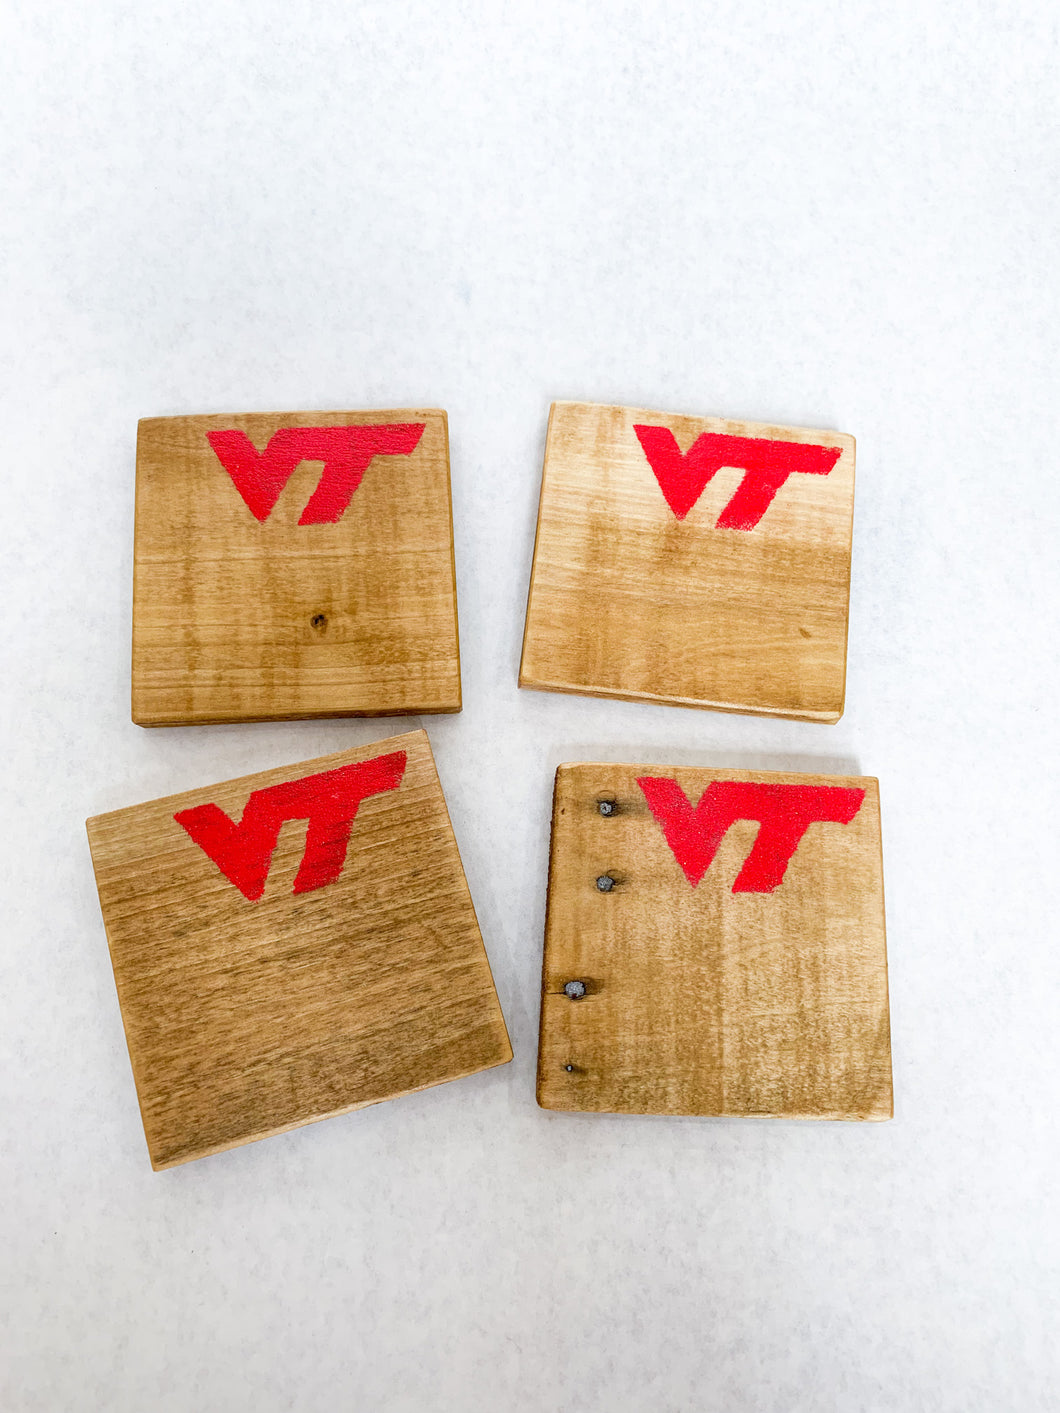 Set of 4 Natural Virginia Tech Coasters with Red Accents